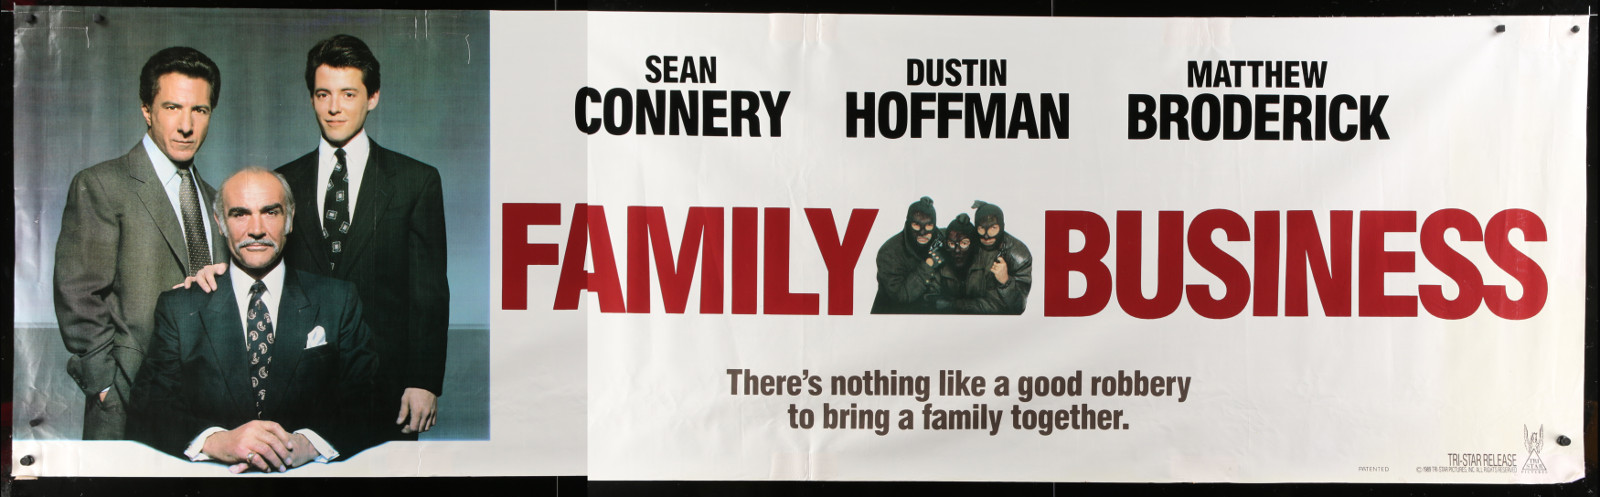 Family Business 2A151 A Part Of A Lot 5 Vinyl Banners '88-90 Great Images From A Variety Of Different Movies!